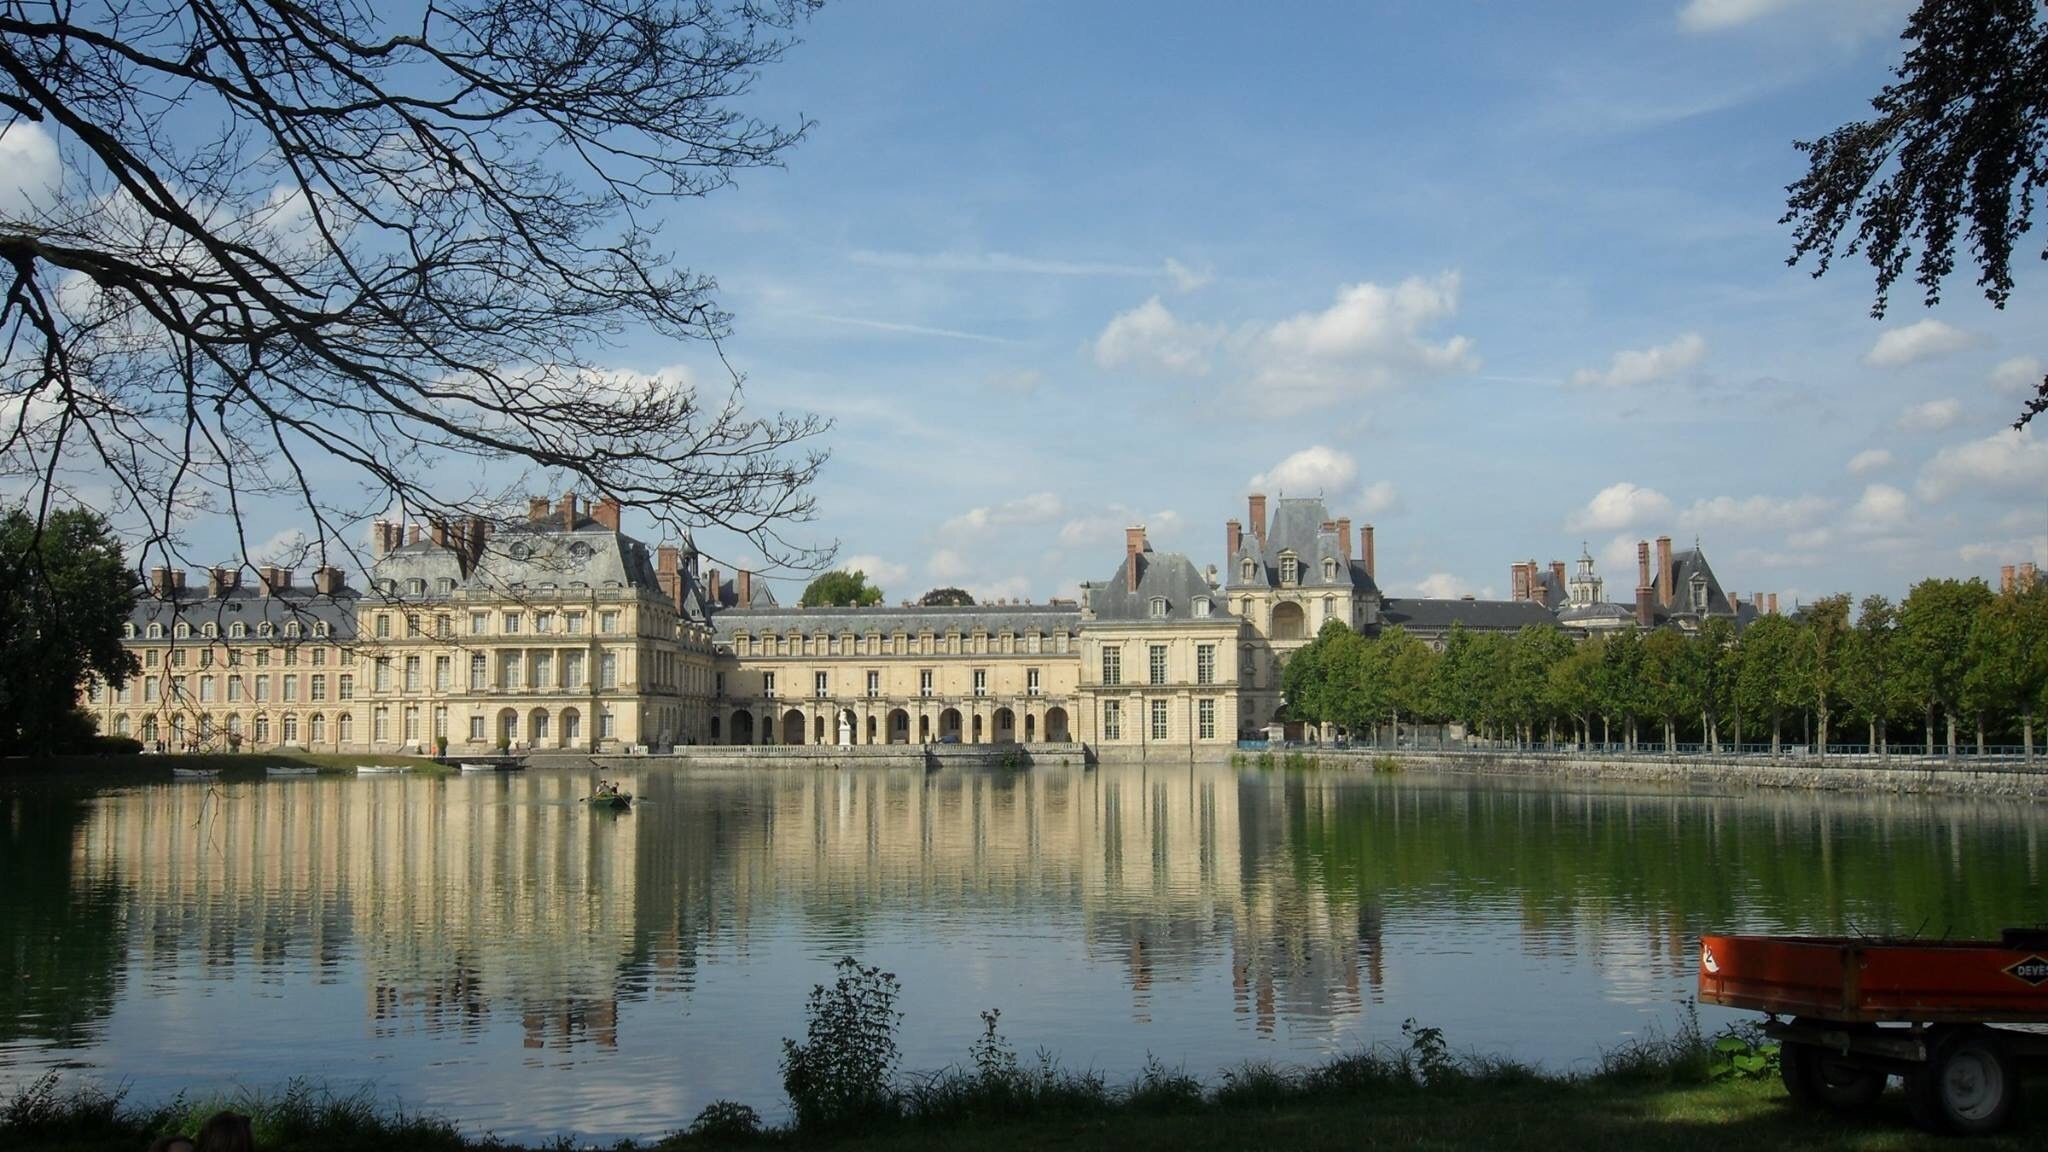 Full day tour to Fontainebleau, Barbizon and the Courances castle